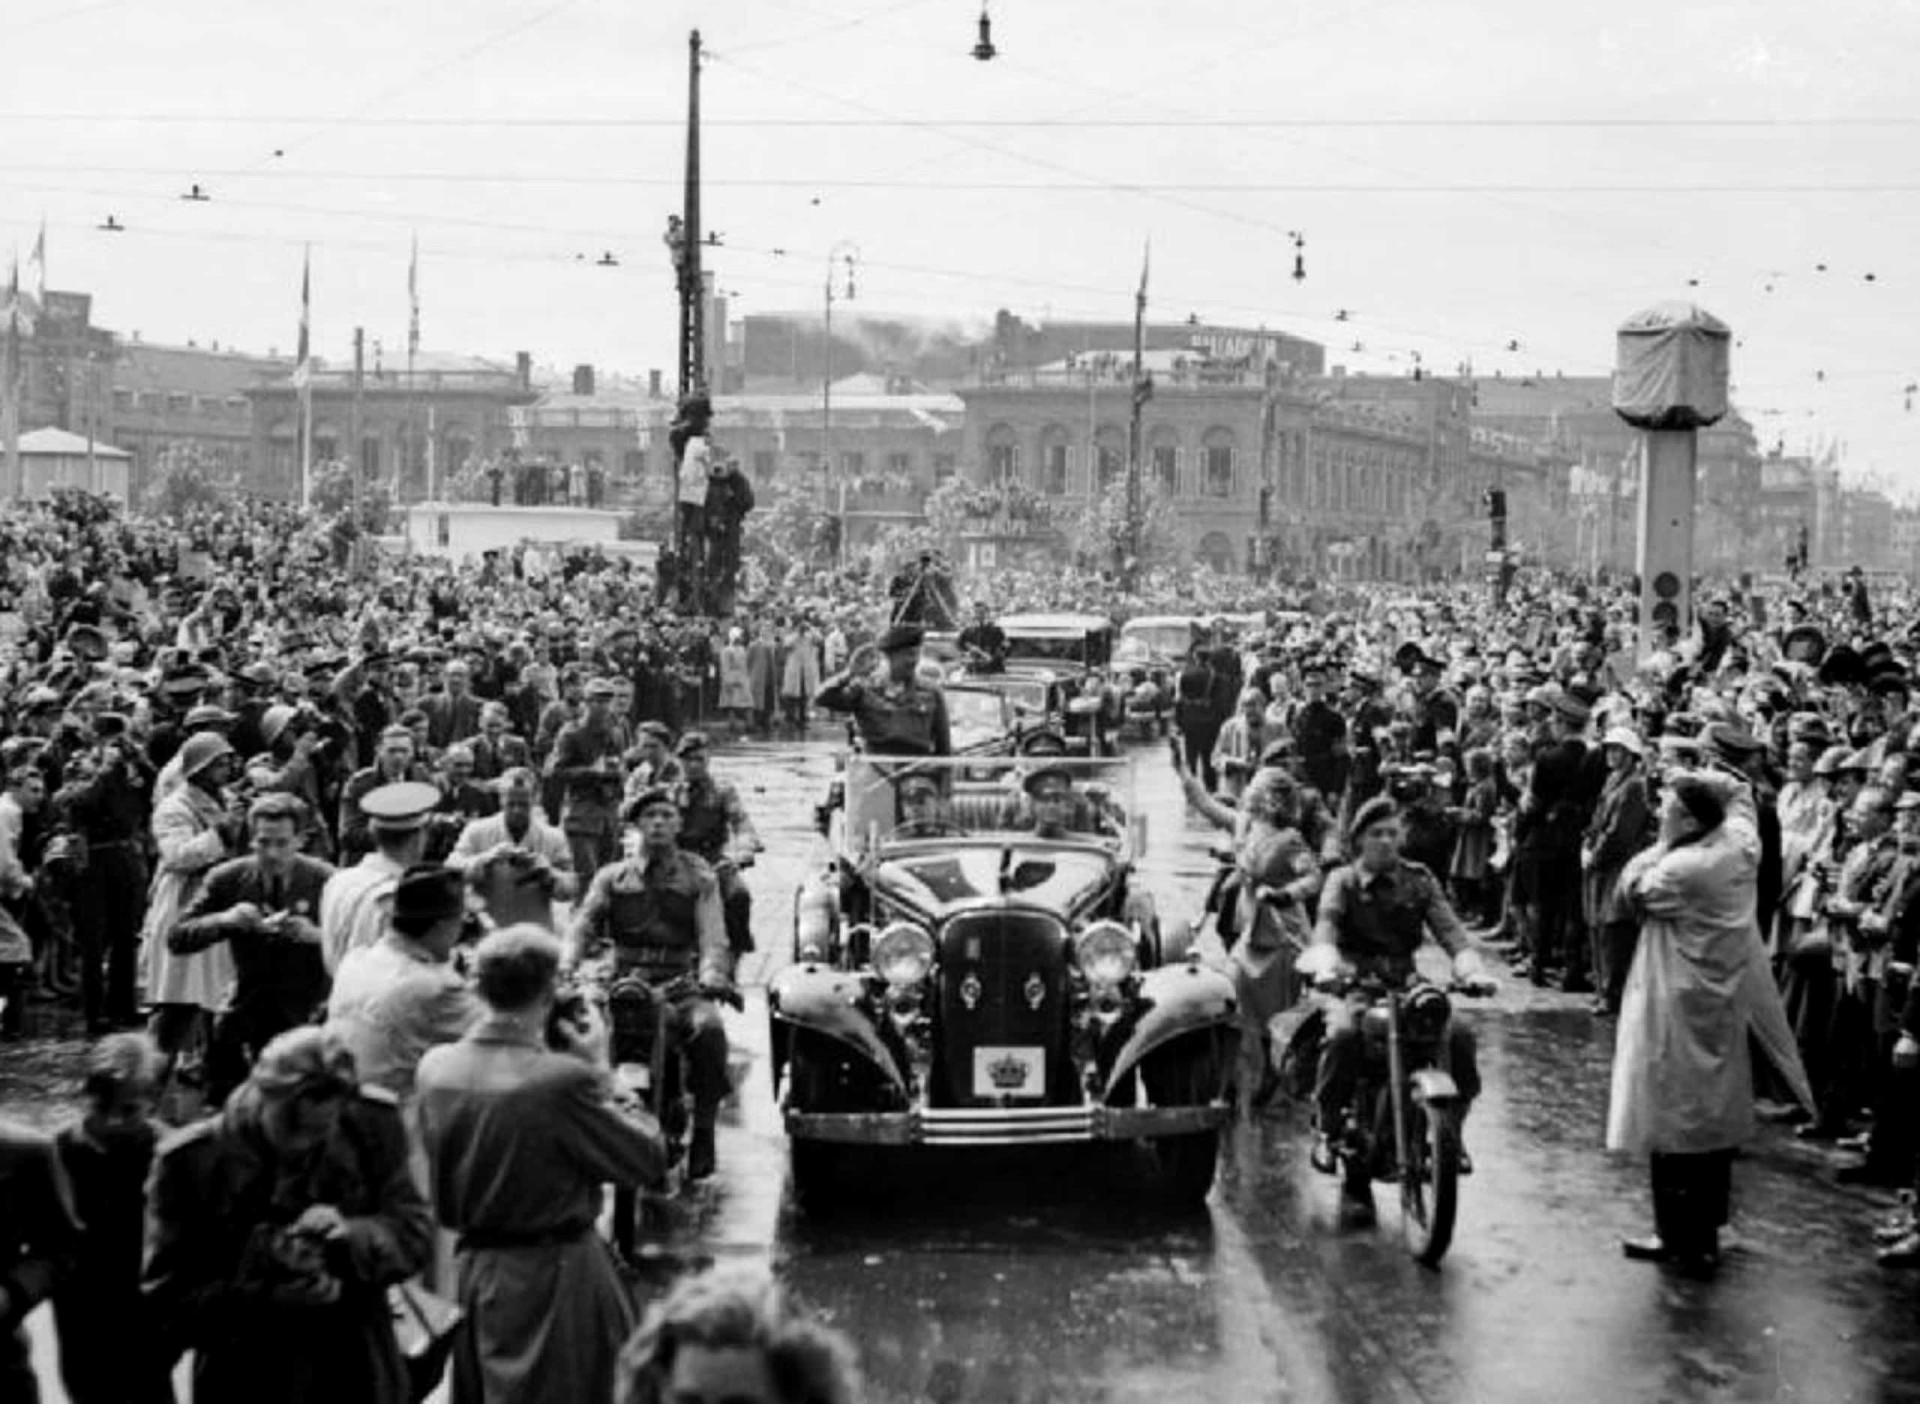 <p>Field Marshal Bernard Montgomery drives through Copenhagen in May 1945, with thousands of Danes lining the streets.</p>